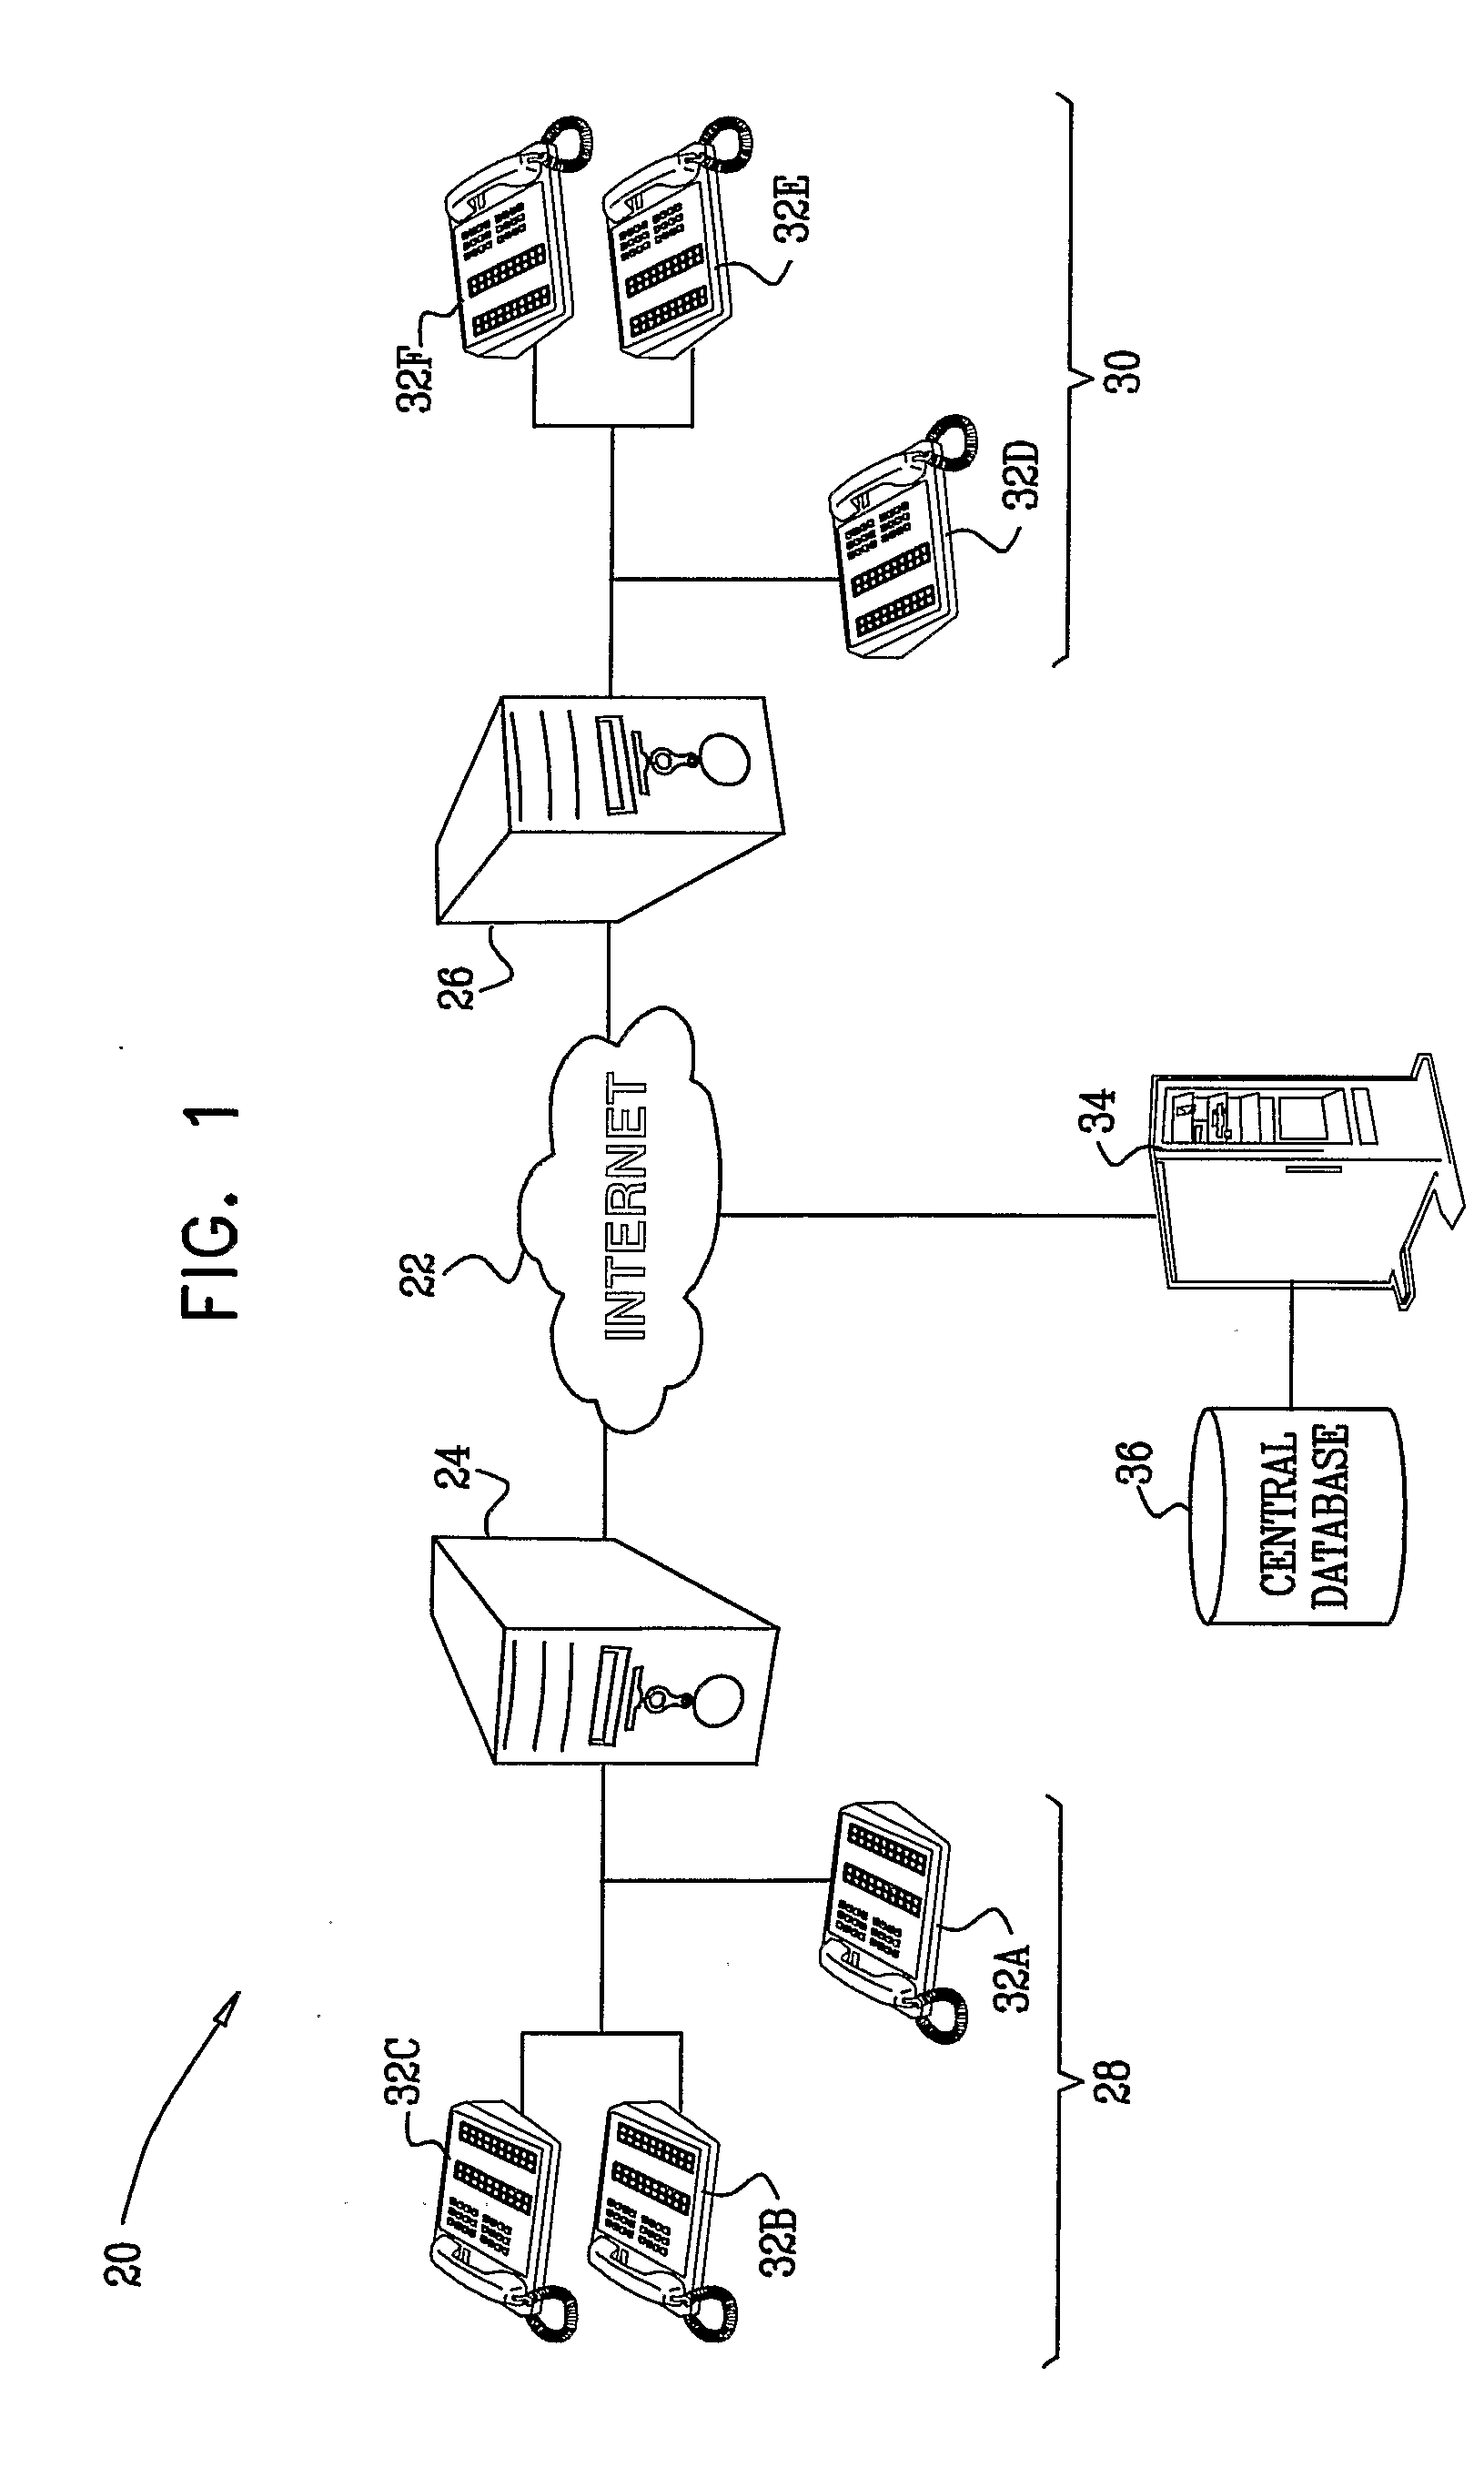 Detection of spit on VOIP calls